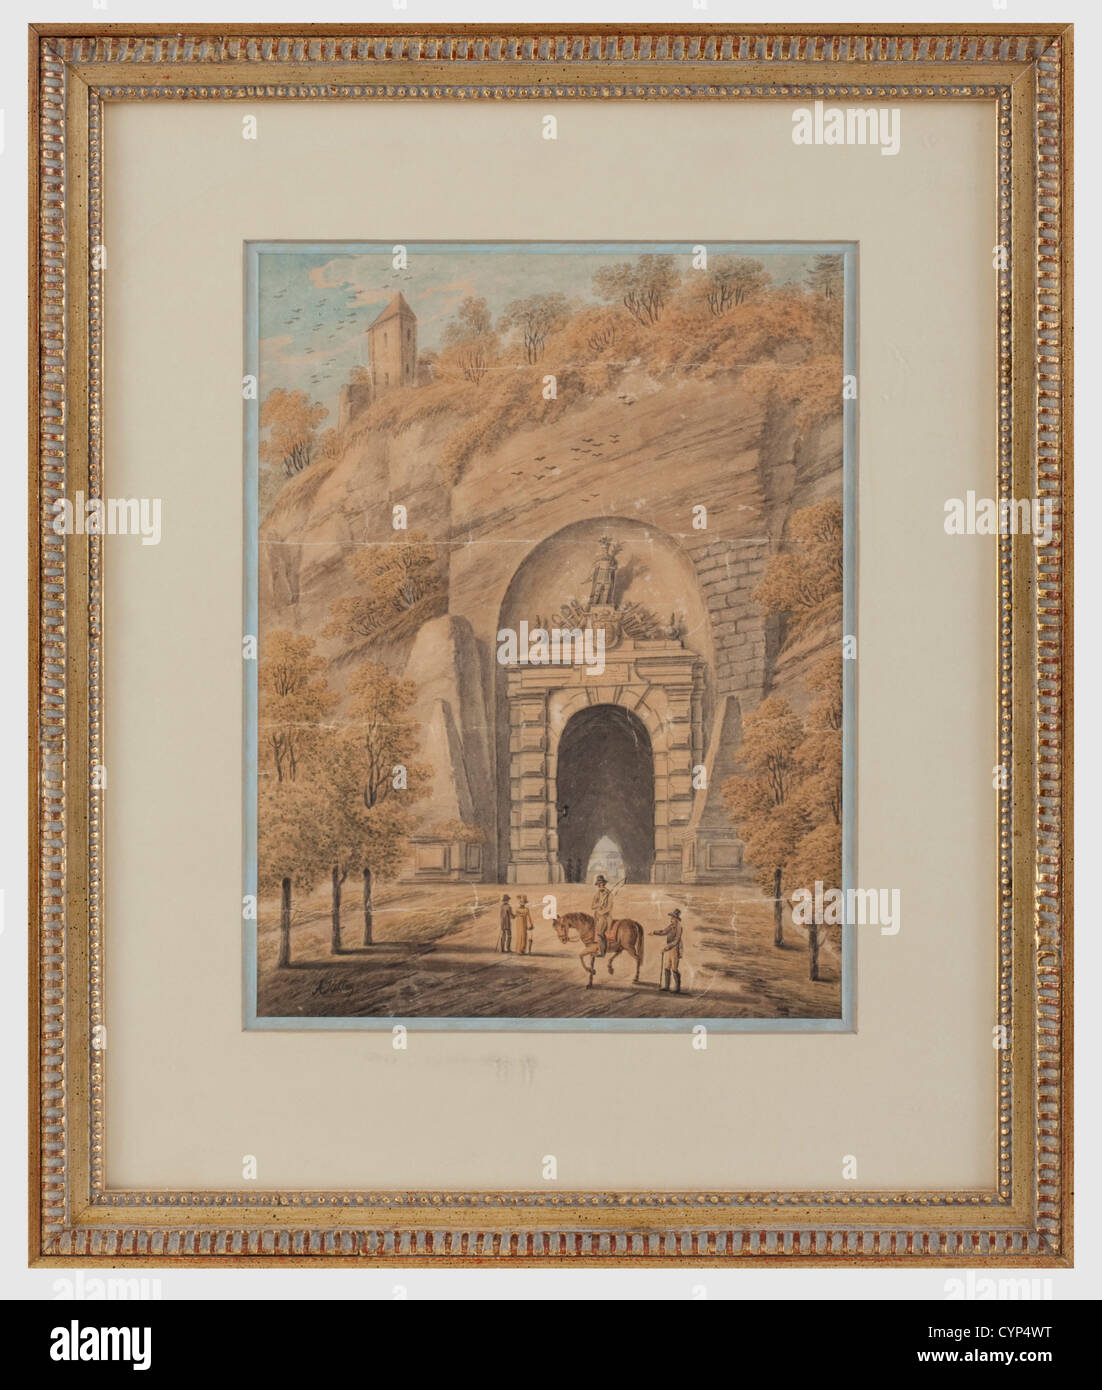 Adolf Hitler (ascribed to) - 'Mönchsbergtunnel in Salzburg', circa 1830/40. Watercolours on cardboard, signed on the lower left 'A. Hitler'. Folded several times. Mounted, with frame 59 x 50 cm. The architecture and perspective of the scene are accurately captured, the depicted figures are not as well executed. With an expertise by Peter Jahn dated Vienna, January 16, 1978. Provenance: Keith Wilson Collection, Kansas City. Keith Wilson bought this watercolour from an American Sergeant of the 101st Airborne Division, who had taken the painting from the, Artist's Copyright has not to be cleared Stock Photo